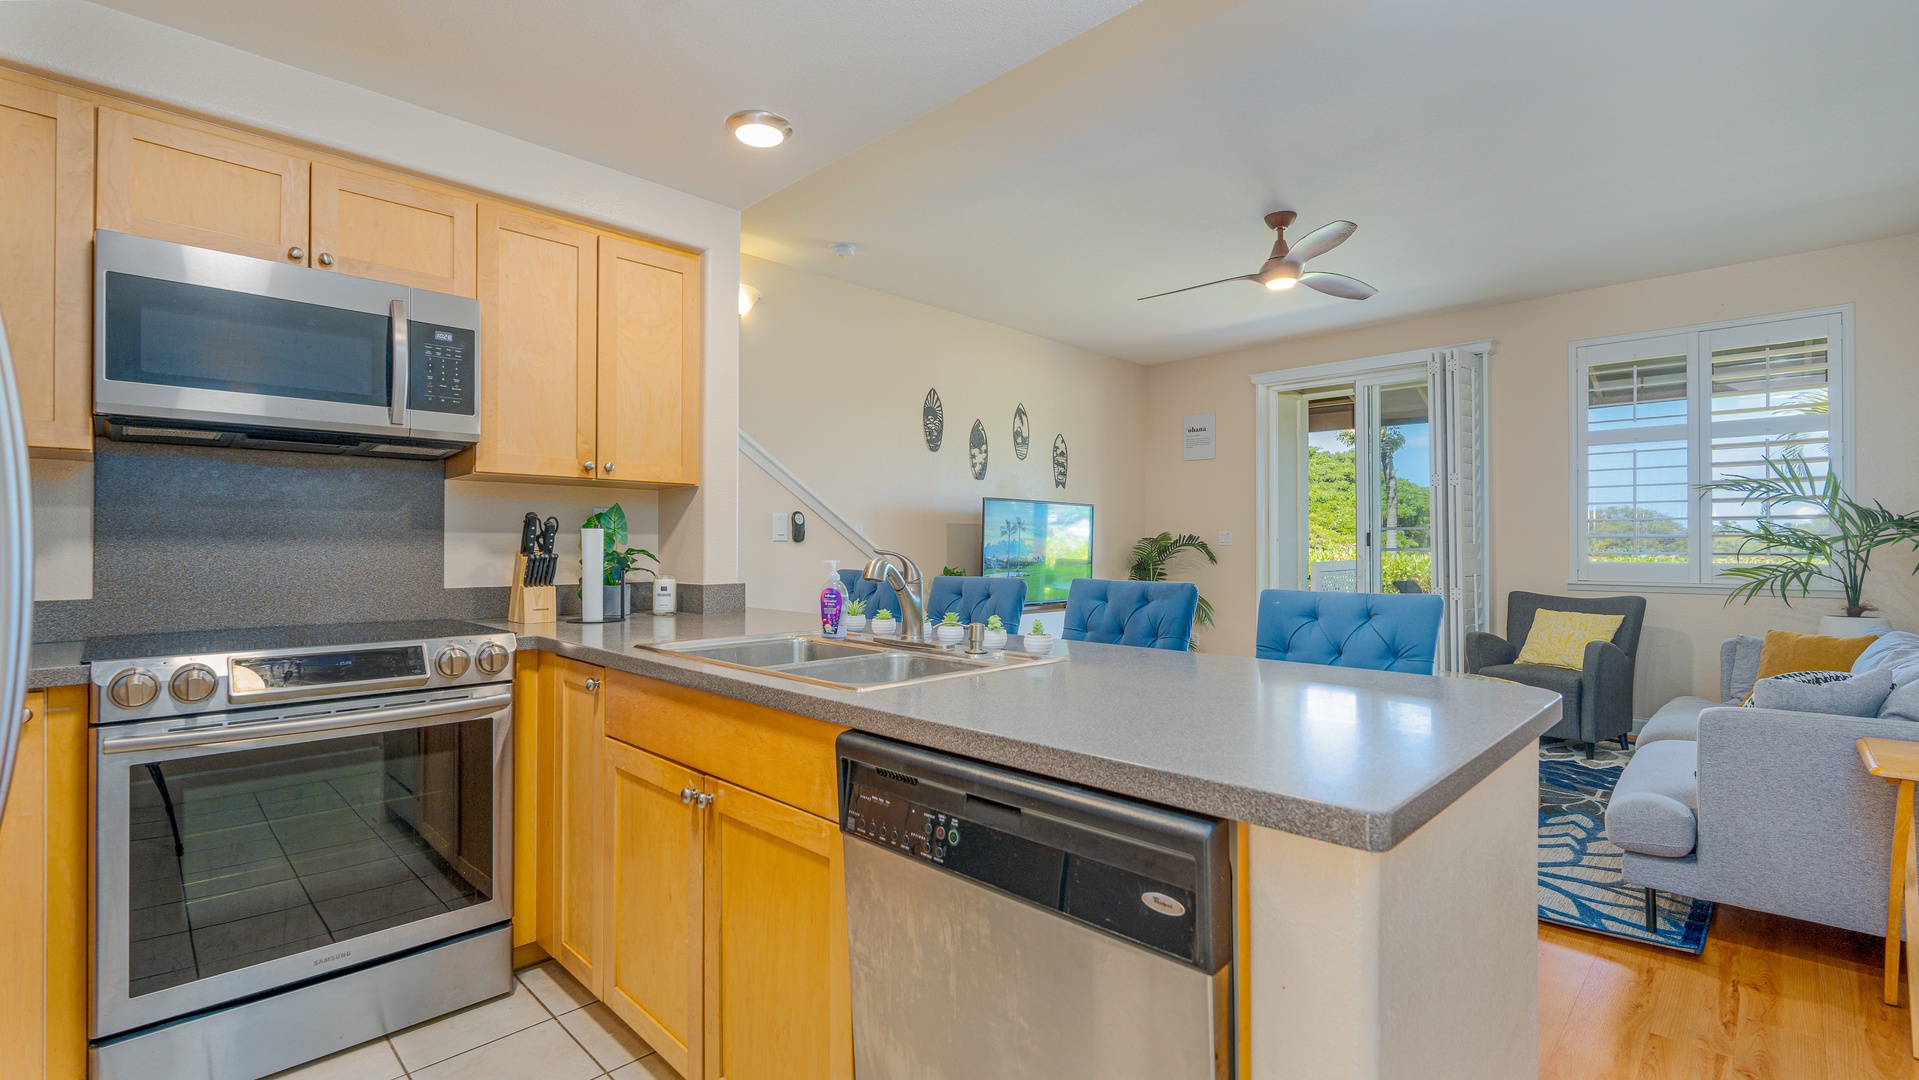 Kapolei Vacation Rentals, Hillside Villas 1496-2 - Dine with a view and converse with the chef.